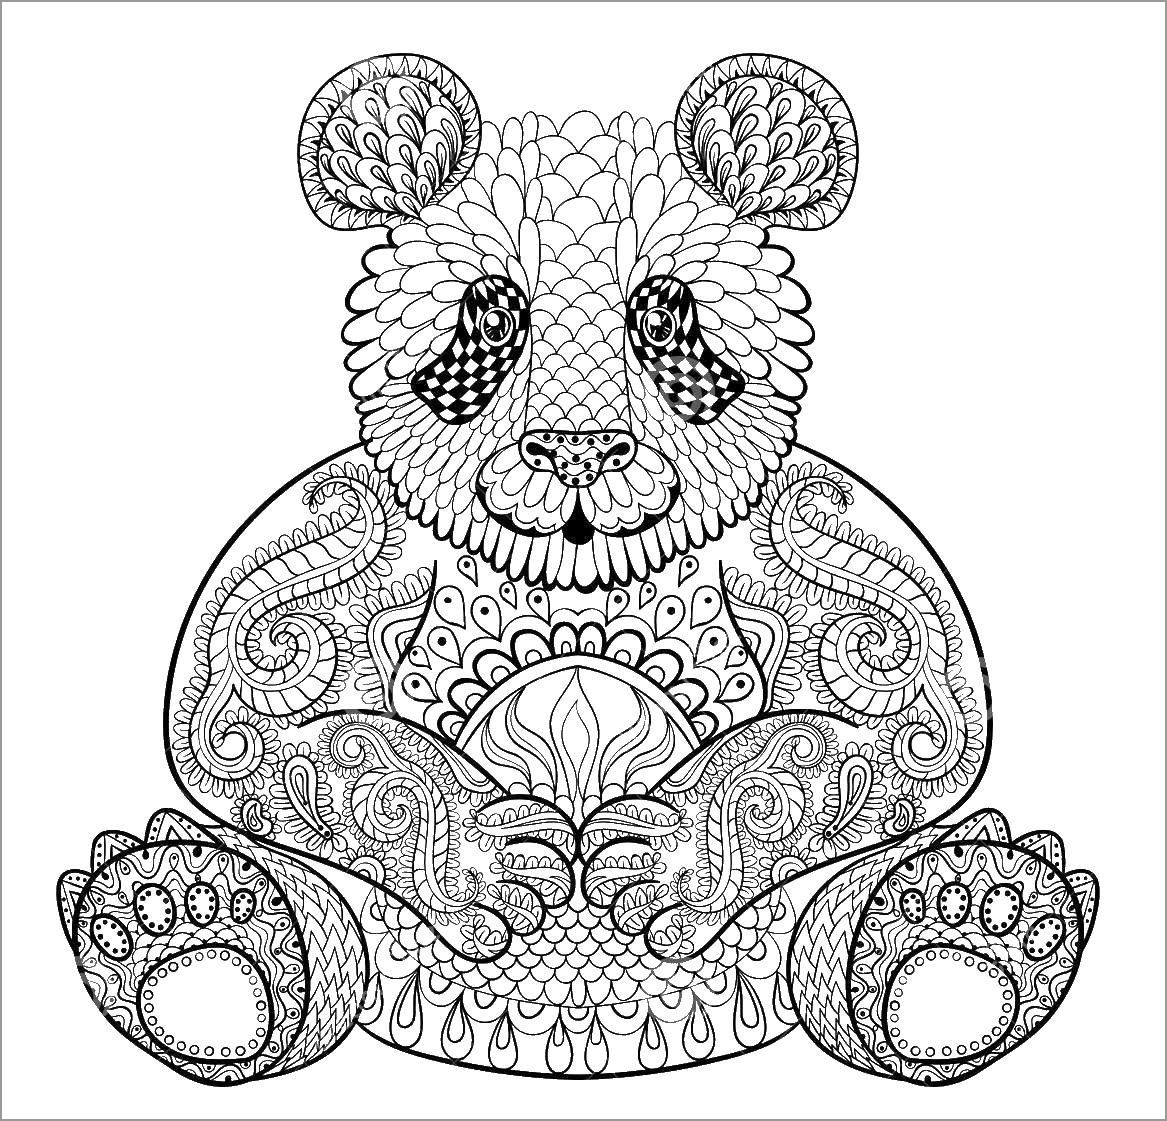 Printable Panda Coloring Pages for Adult